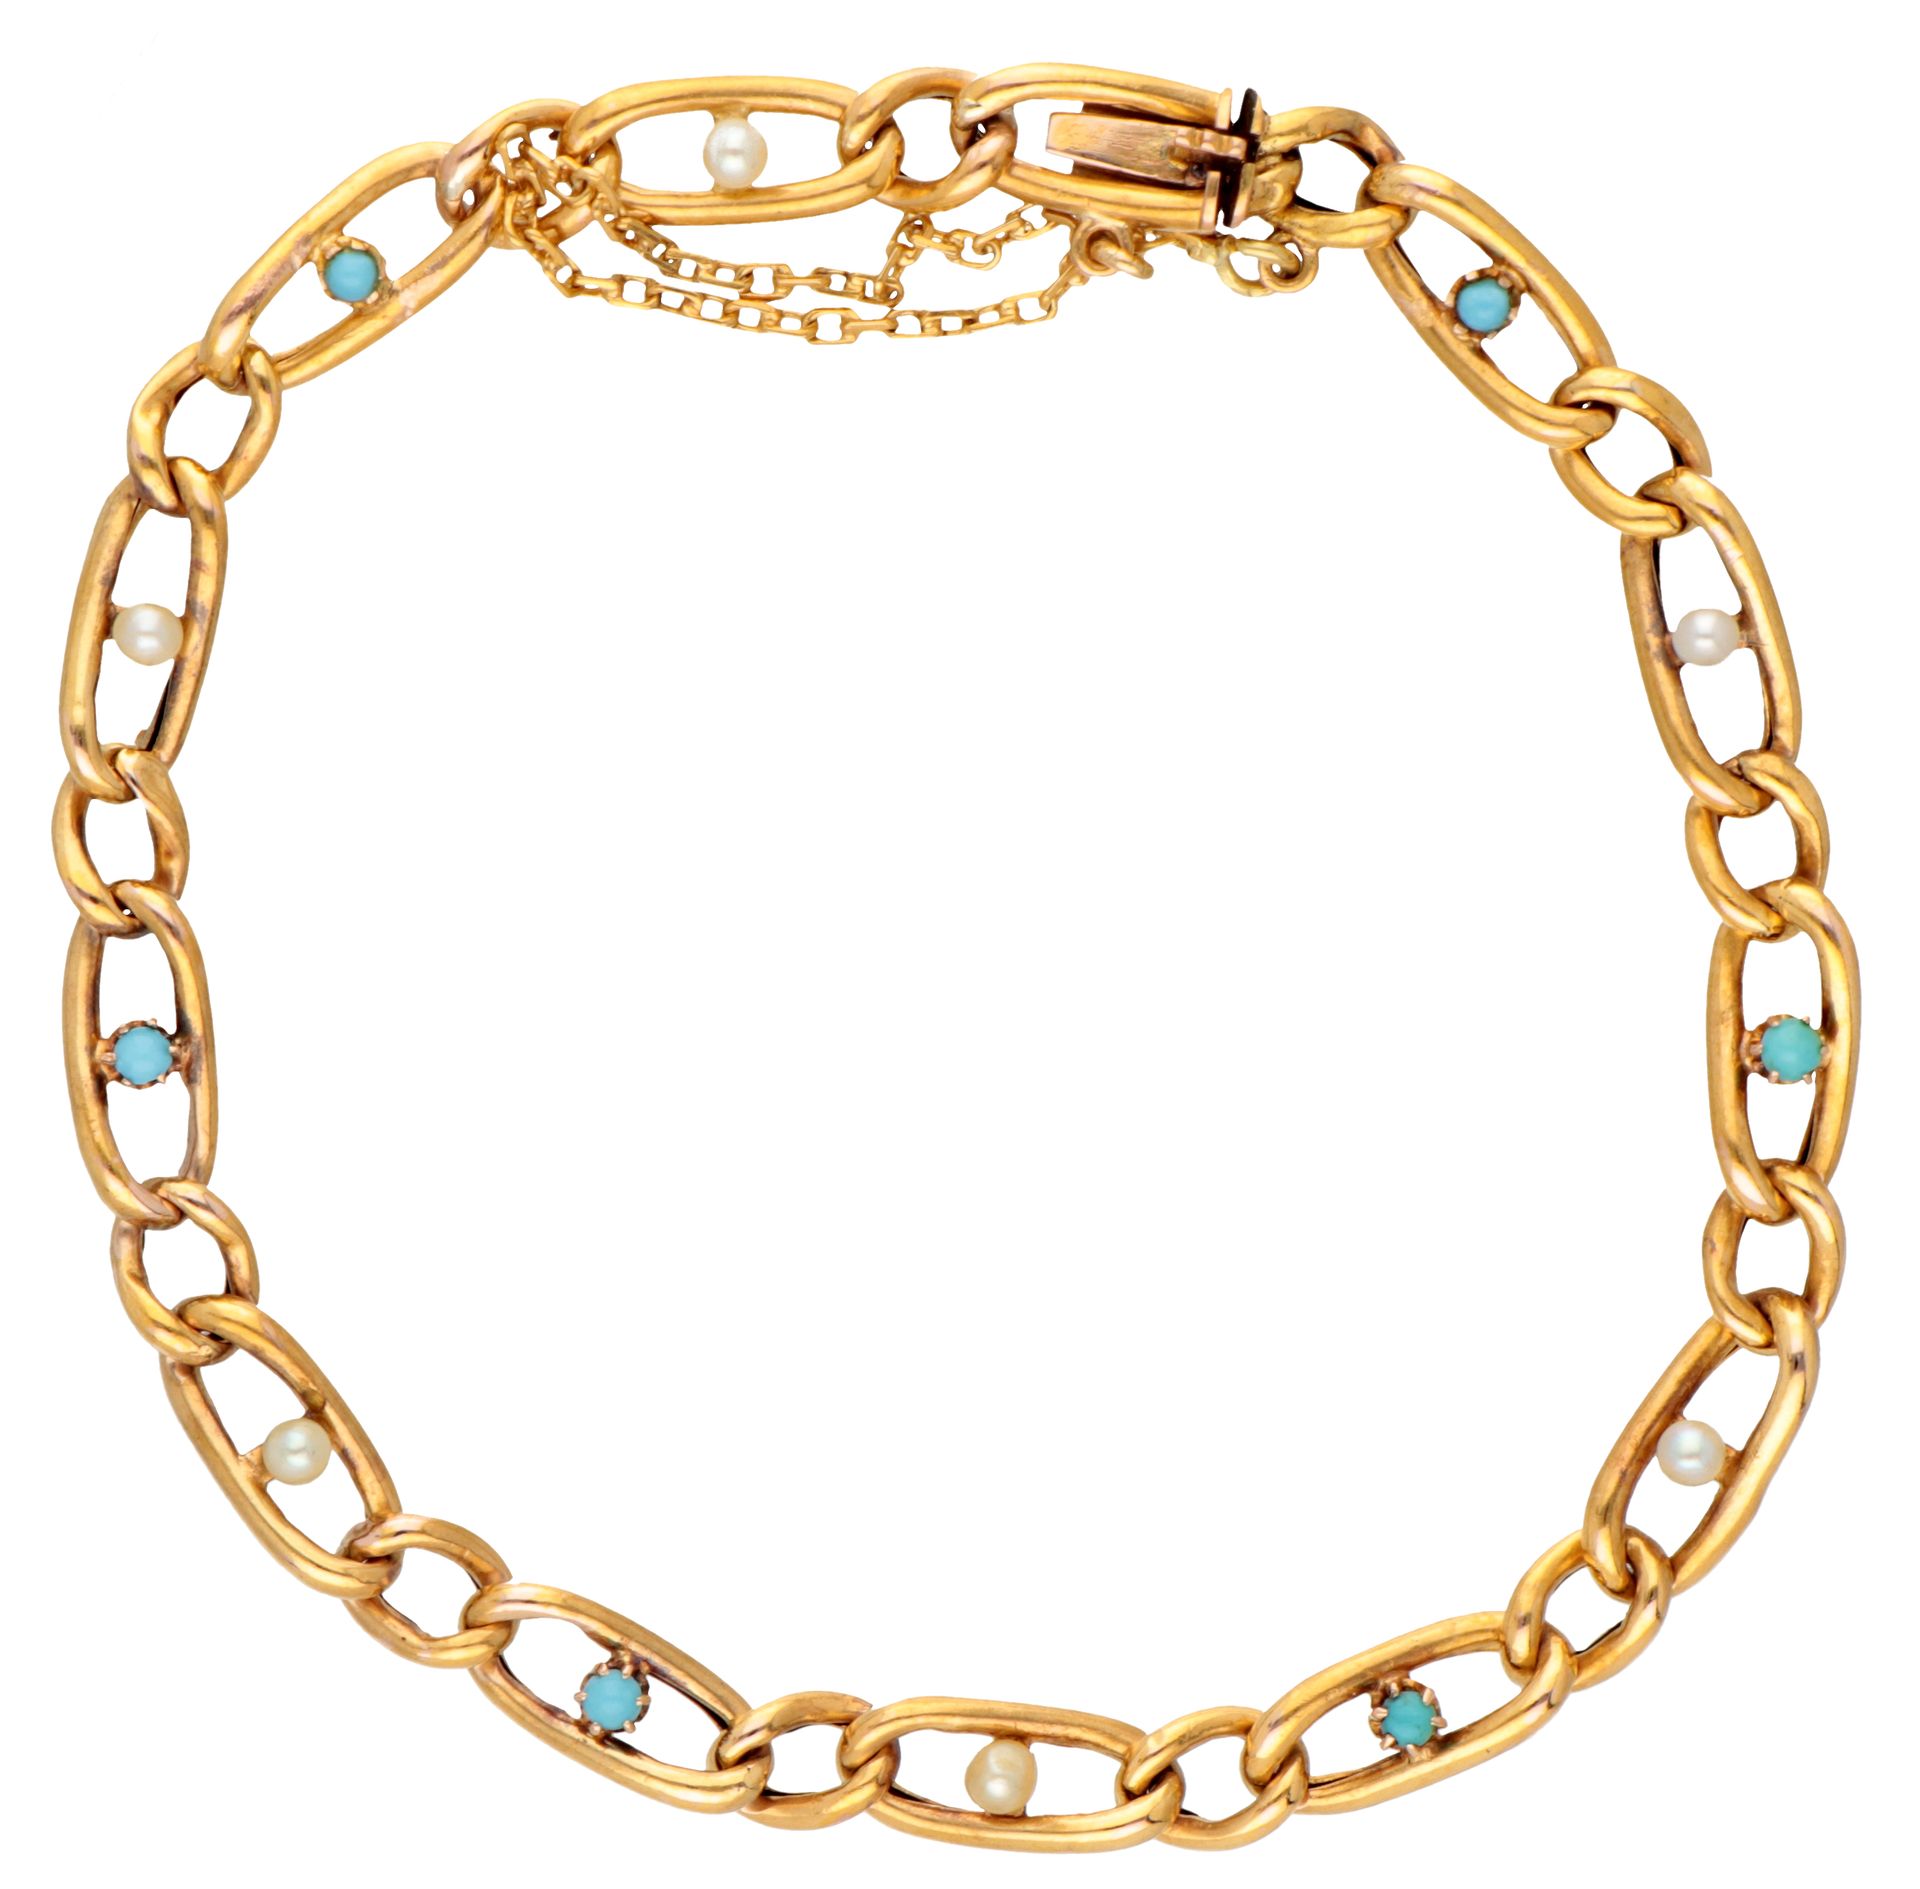 Vintage 18K. Yellow gold link bracelet set with seed pearls and blue stones. 印章：&hellip;